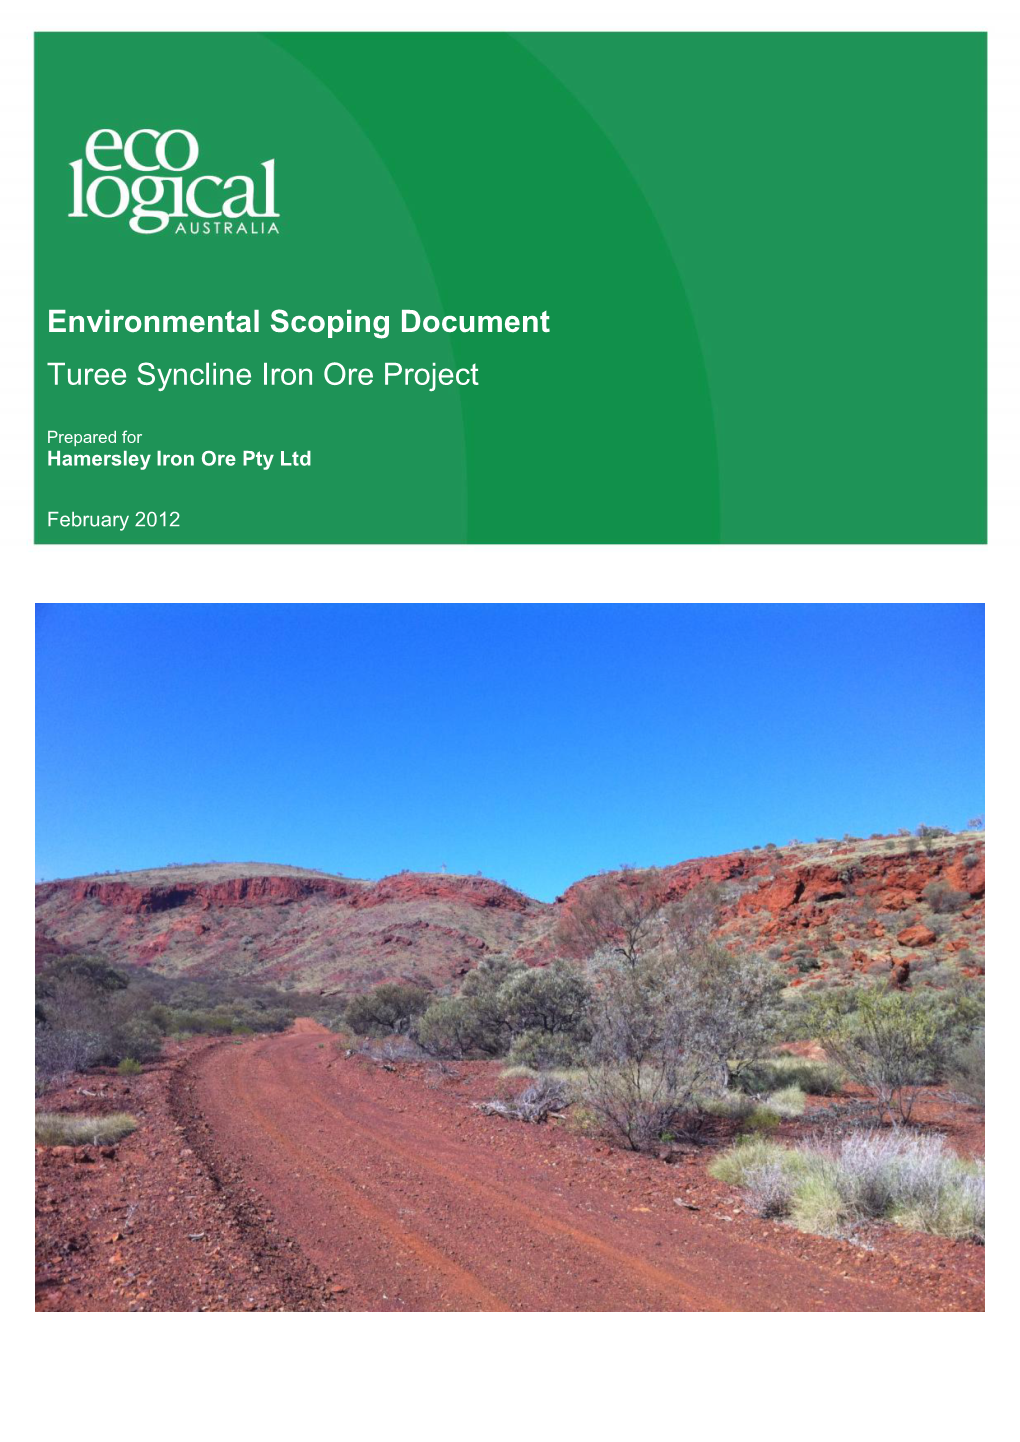 Environmental Scoping Document Turee Syncline Iron Ore Project